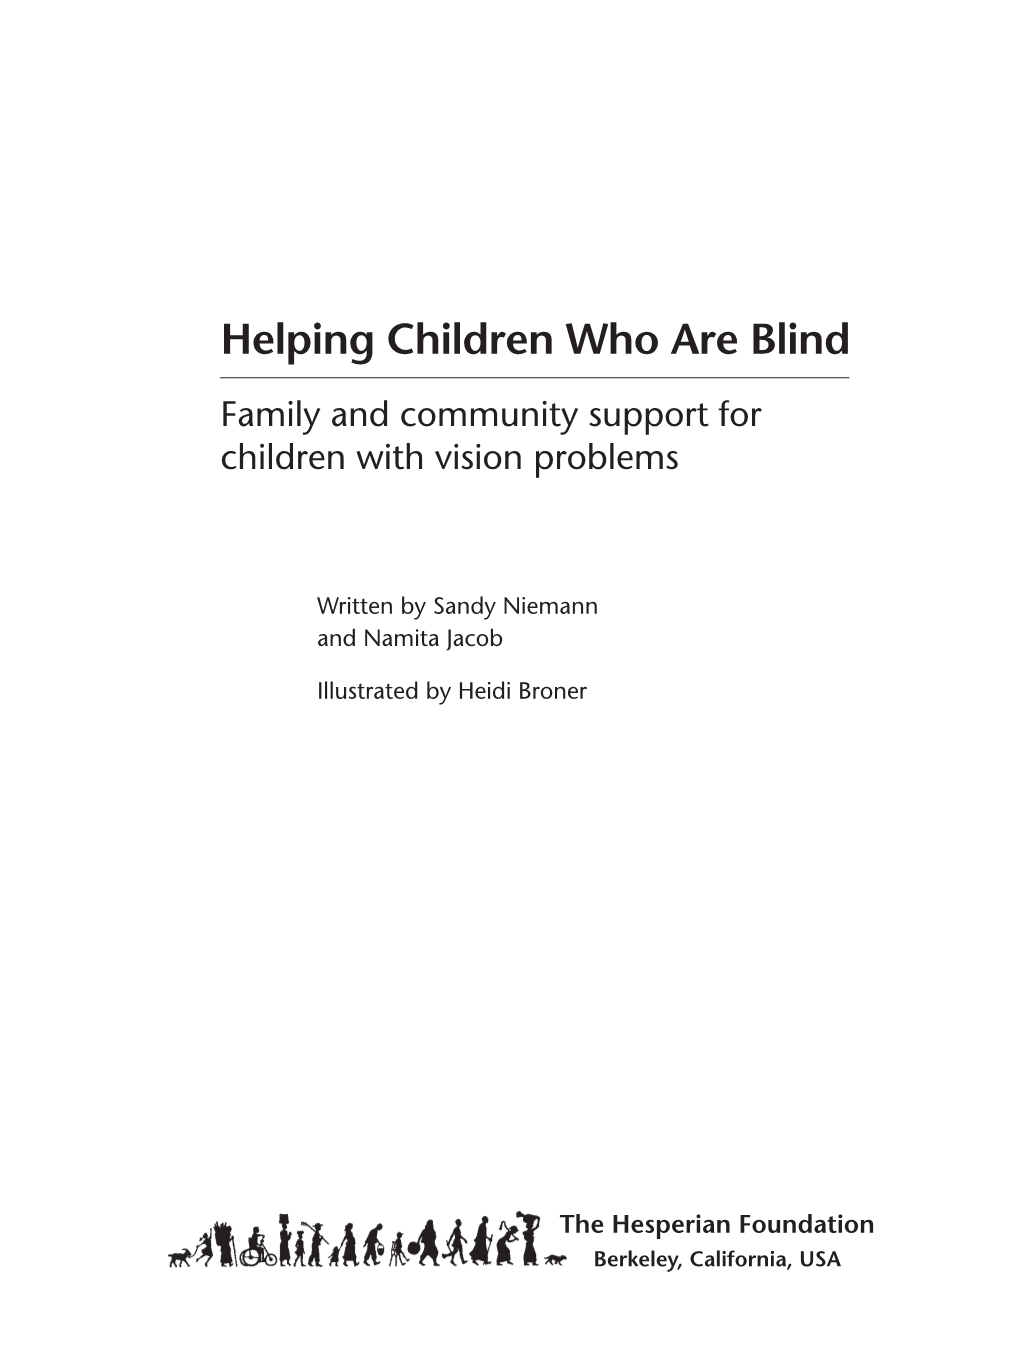 Helping Children Who Are Blind Family and Community Support for Children with Vision Problems